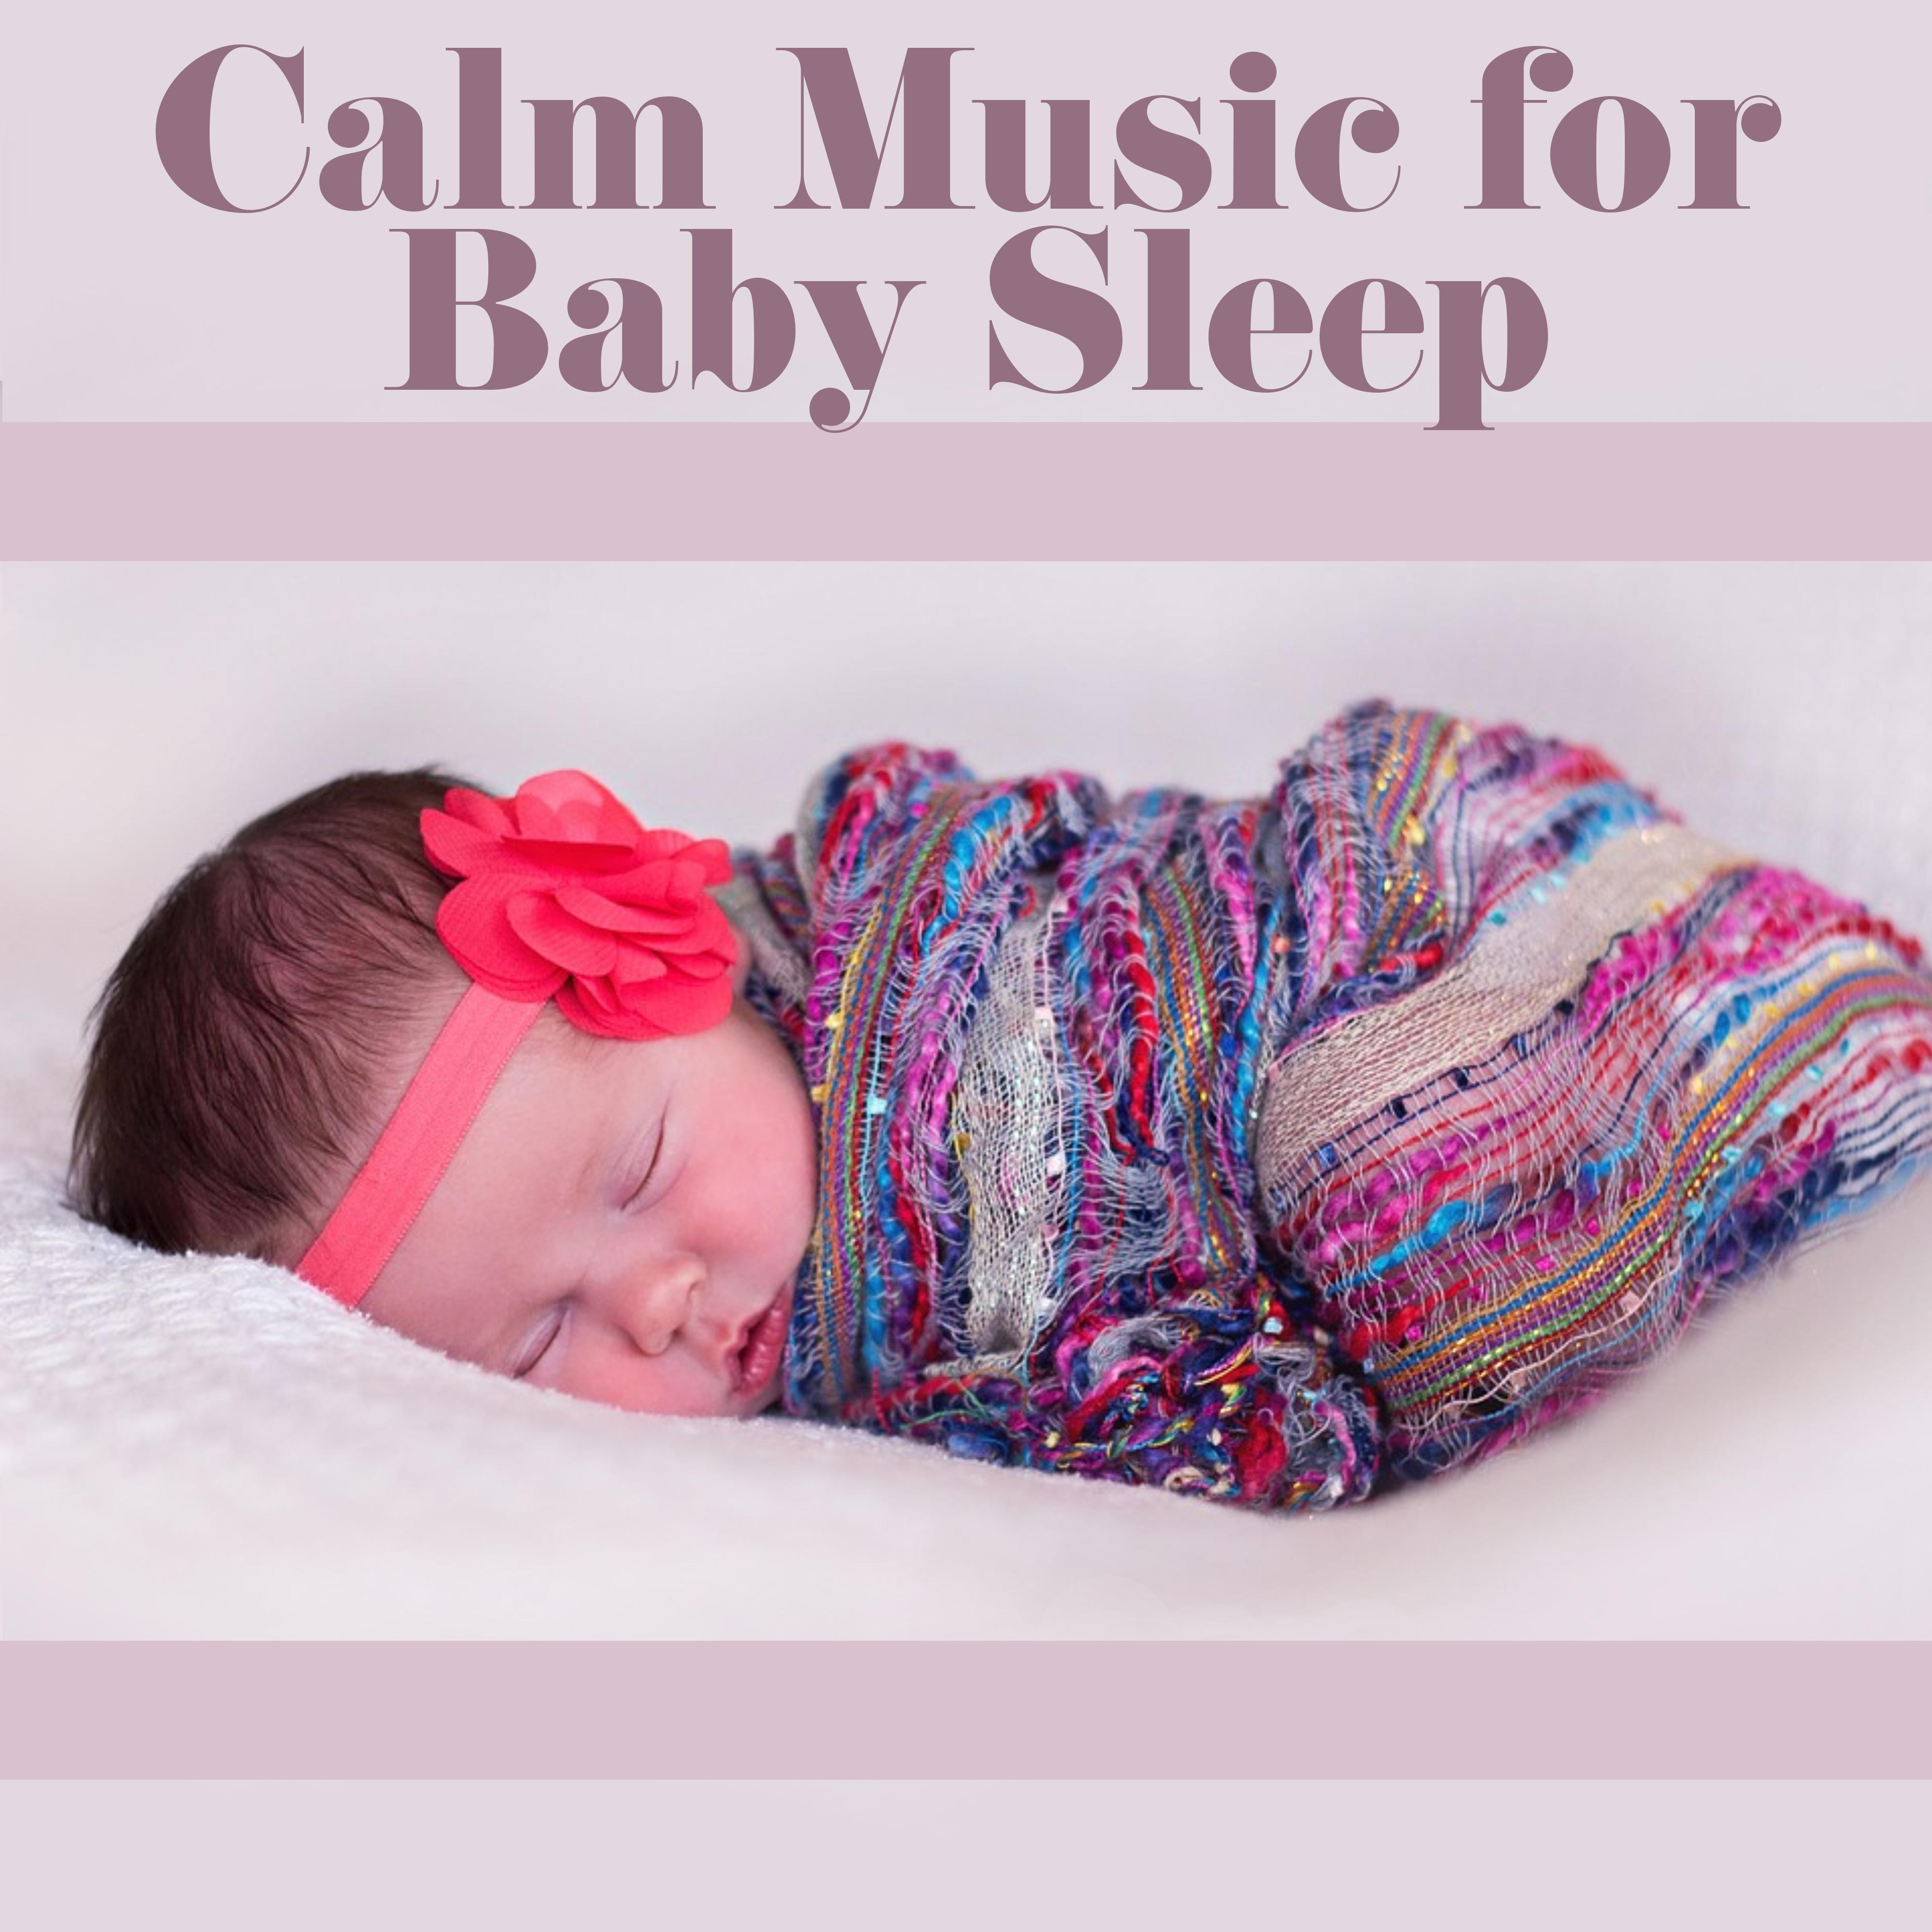 Calm Music for Baby Sleep – Soft New Age for Sleeping, Calm Night, Cure Insomnia, Baby Lullaby